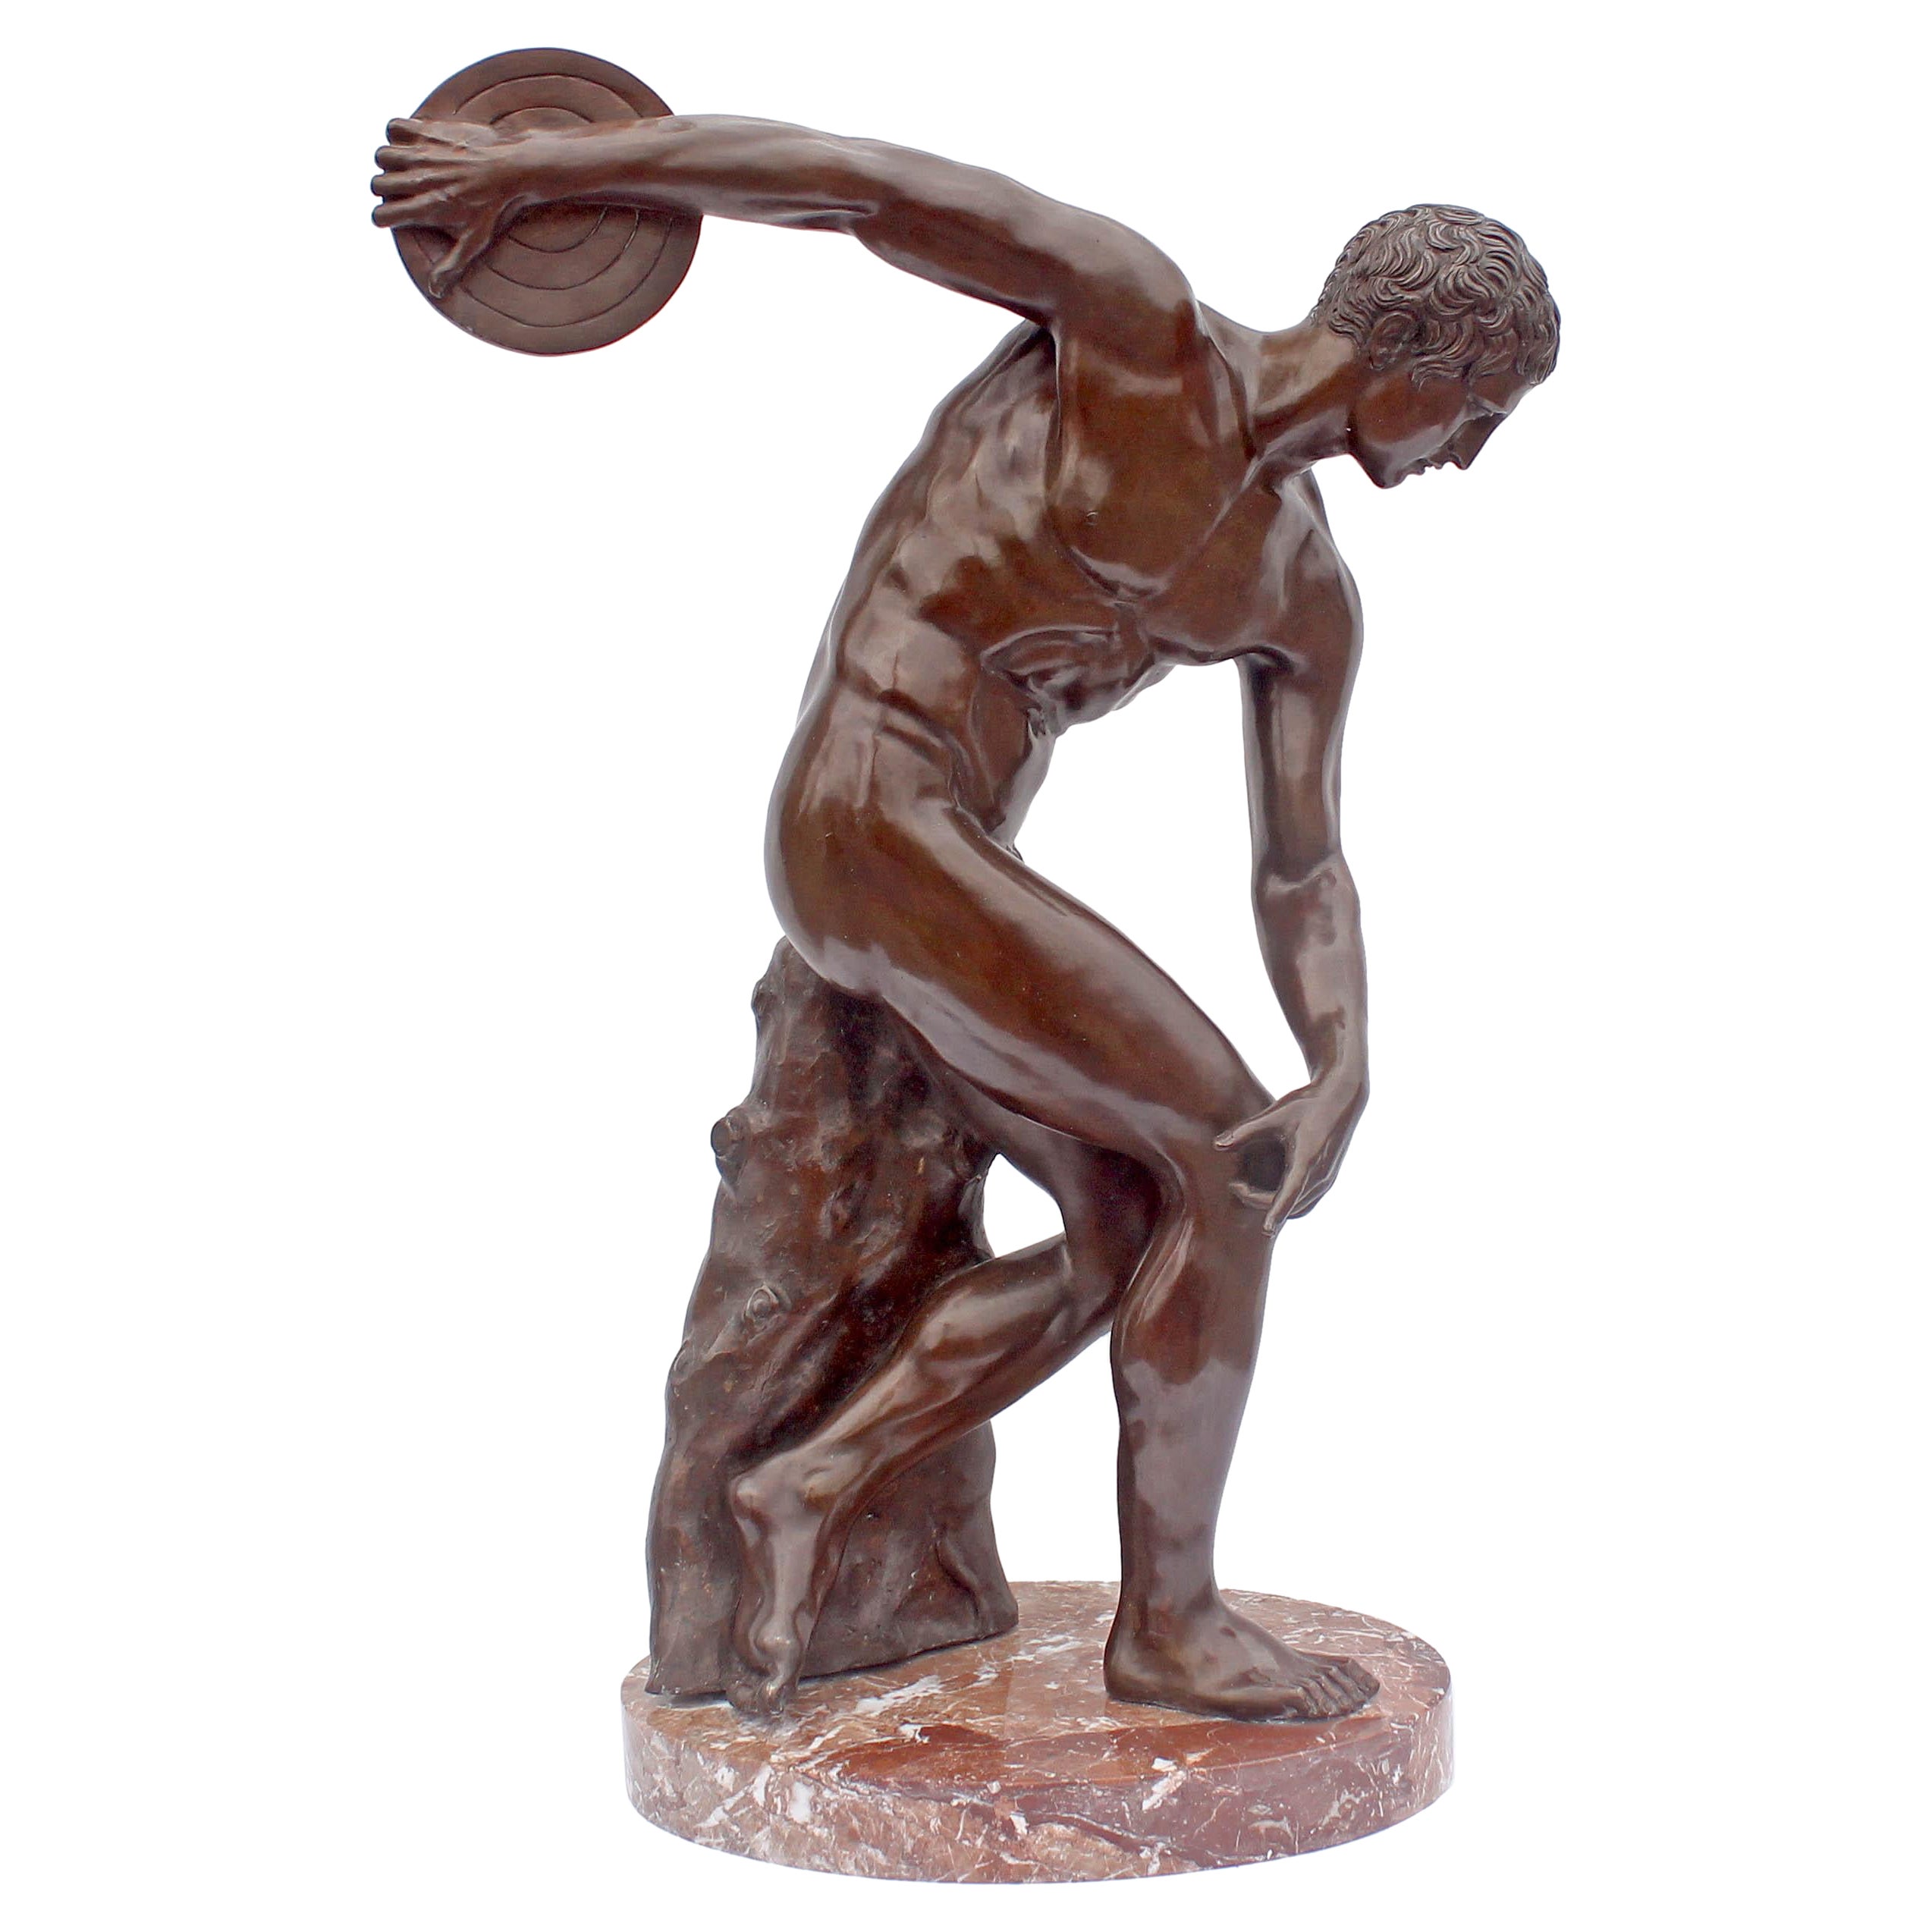 Unknown Nude Sculpture - Large Bronze Sculpture "The Discus Thrower" Grand Tour